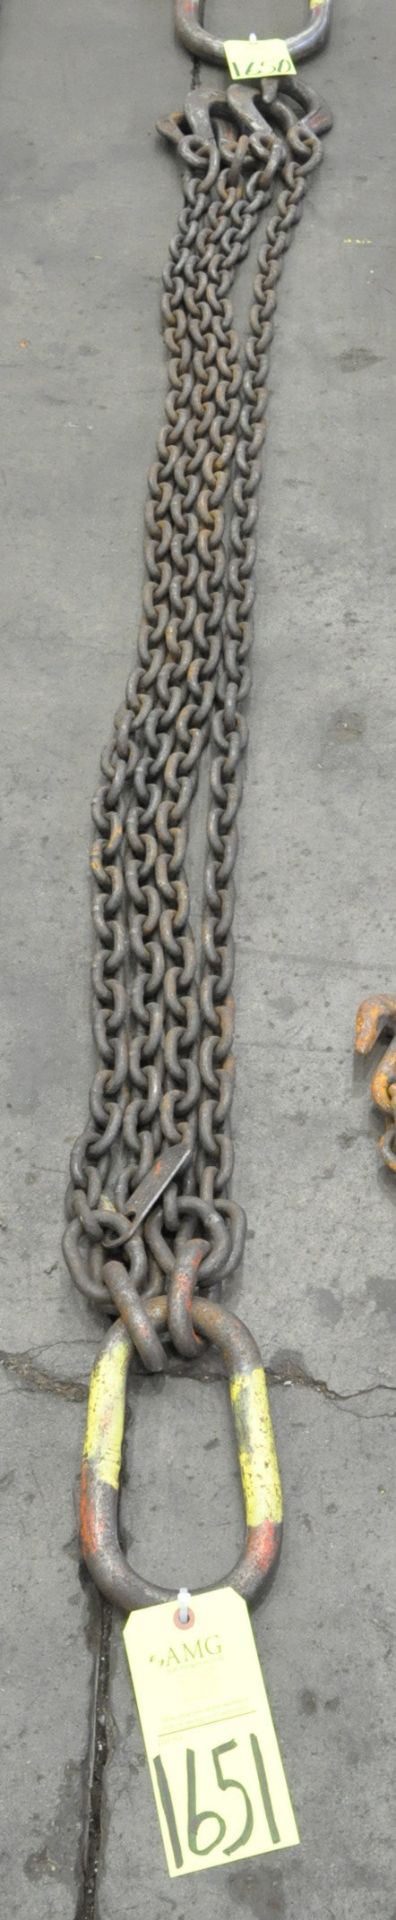 3/8" Link x 6' 6" Long 4-Hook Chain Sling, Cert Tag, (G-24) (Yellow Tag)